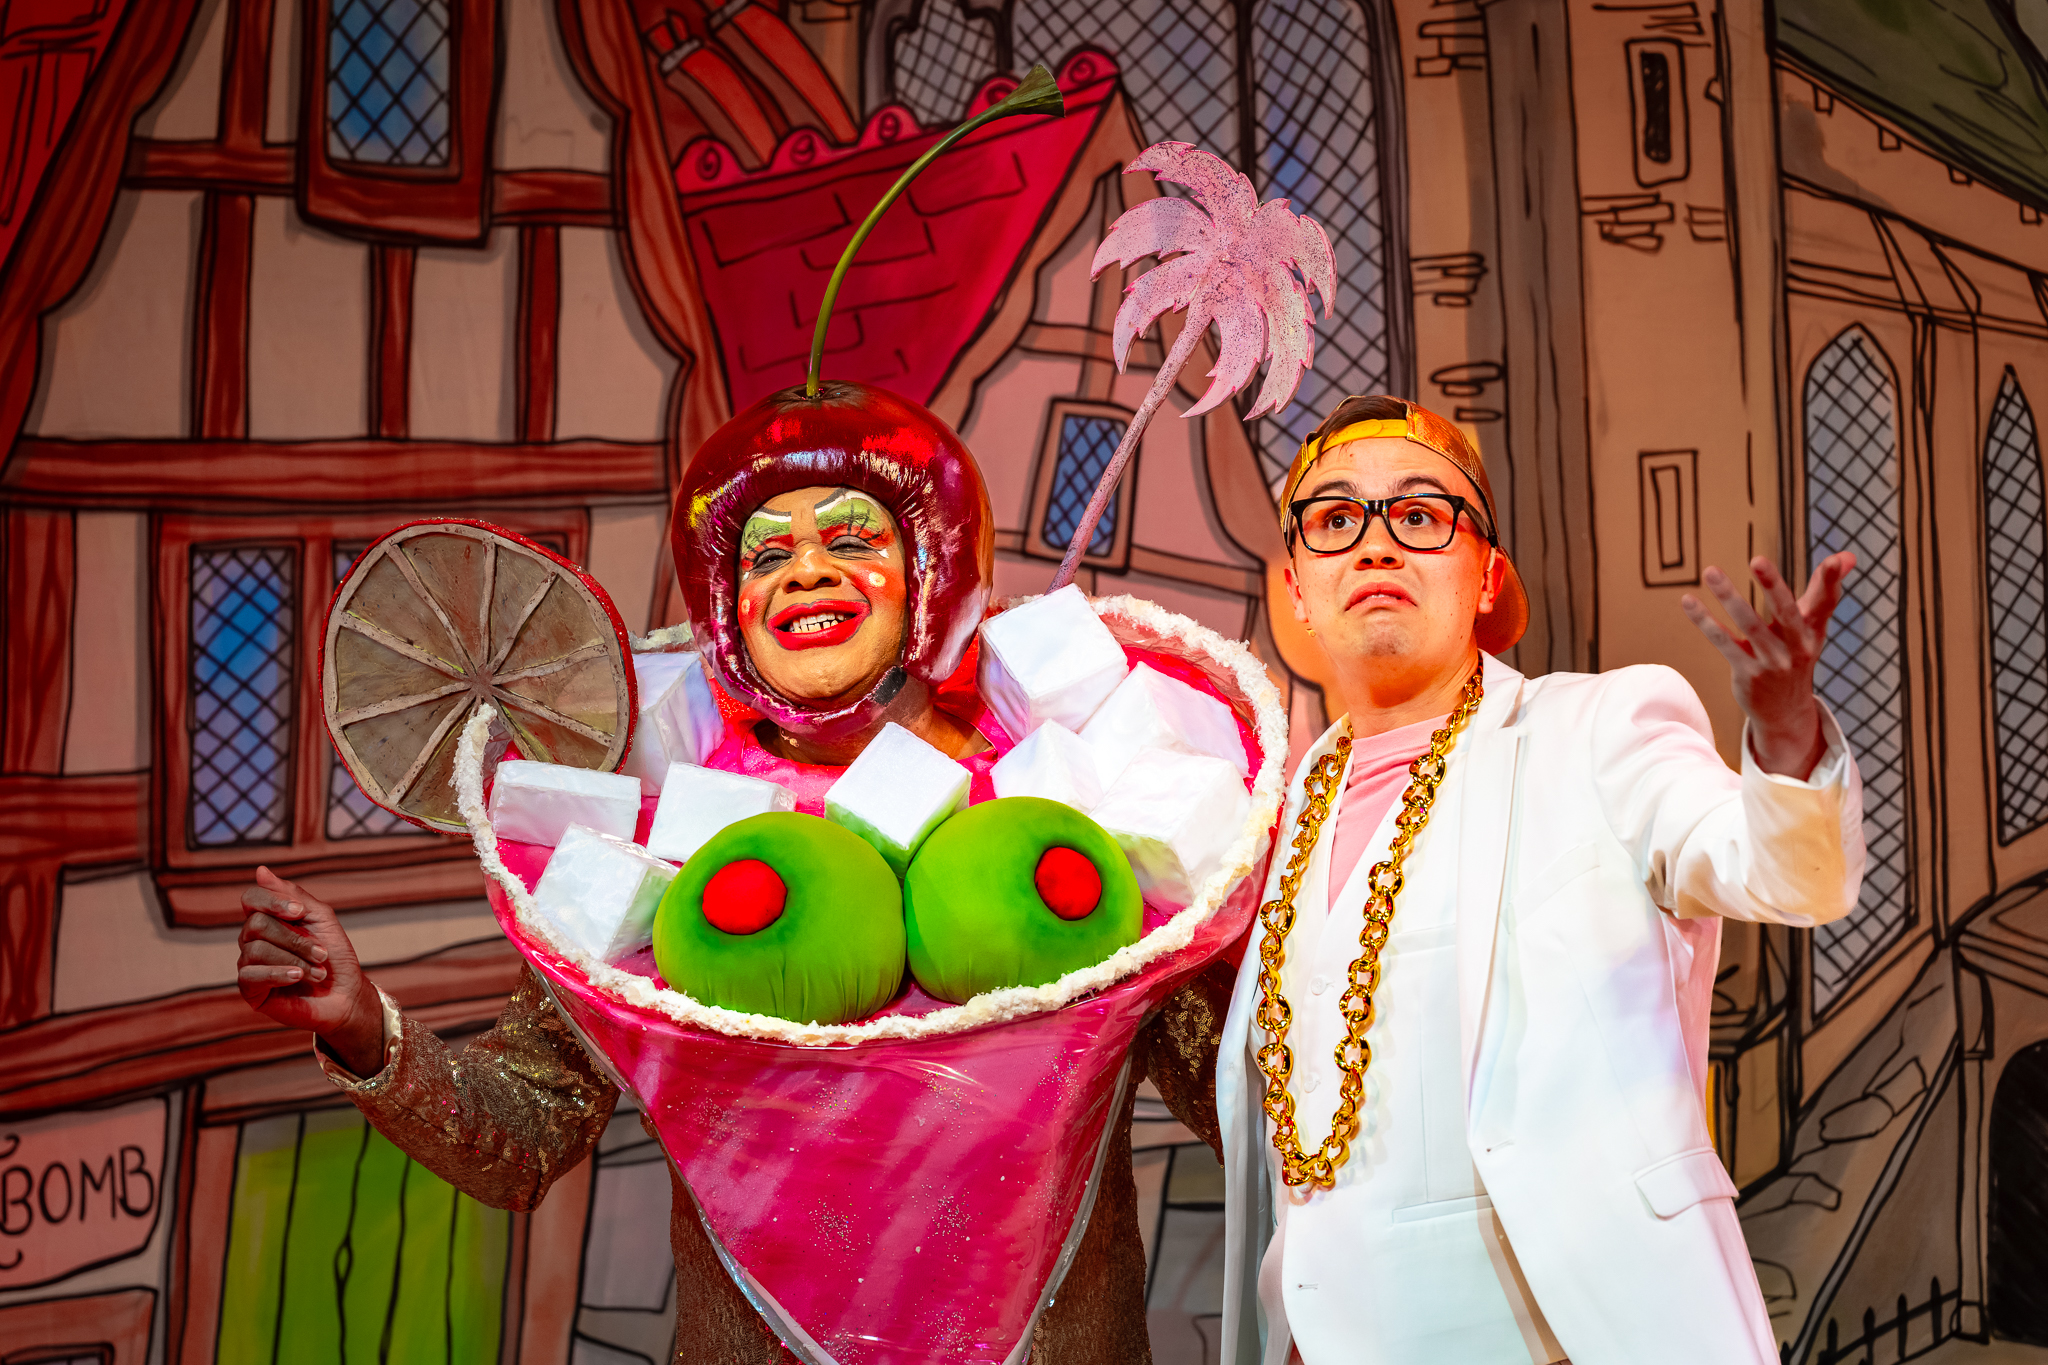 Clive Rowe (as Widow Twankey) and Rishi Manuel (as Wishy) in a scene from Aladdin at Hackney Empire